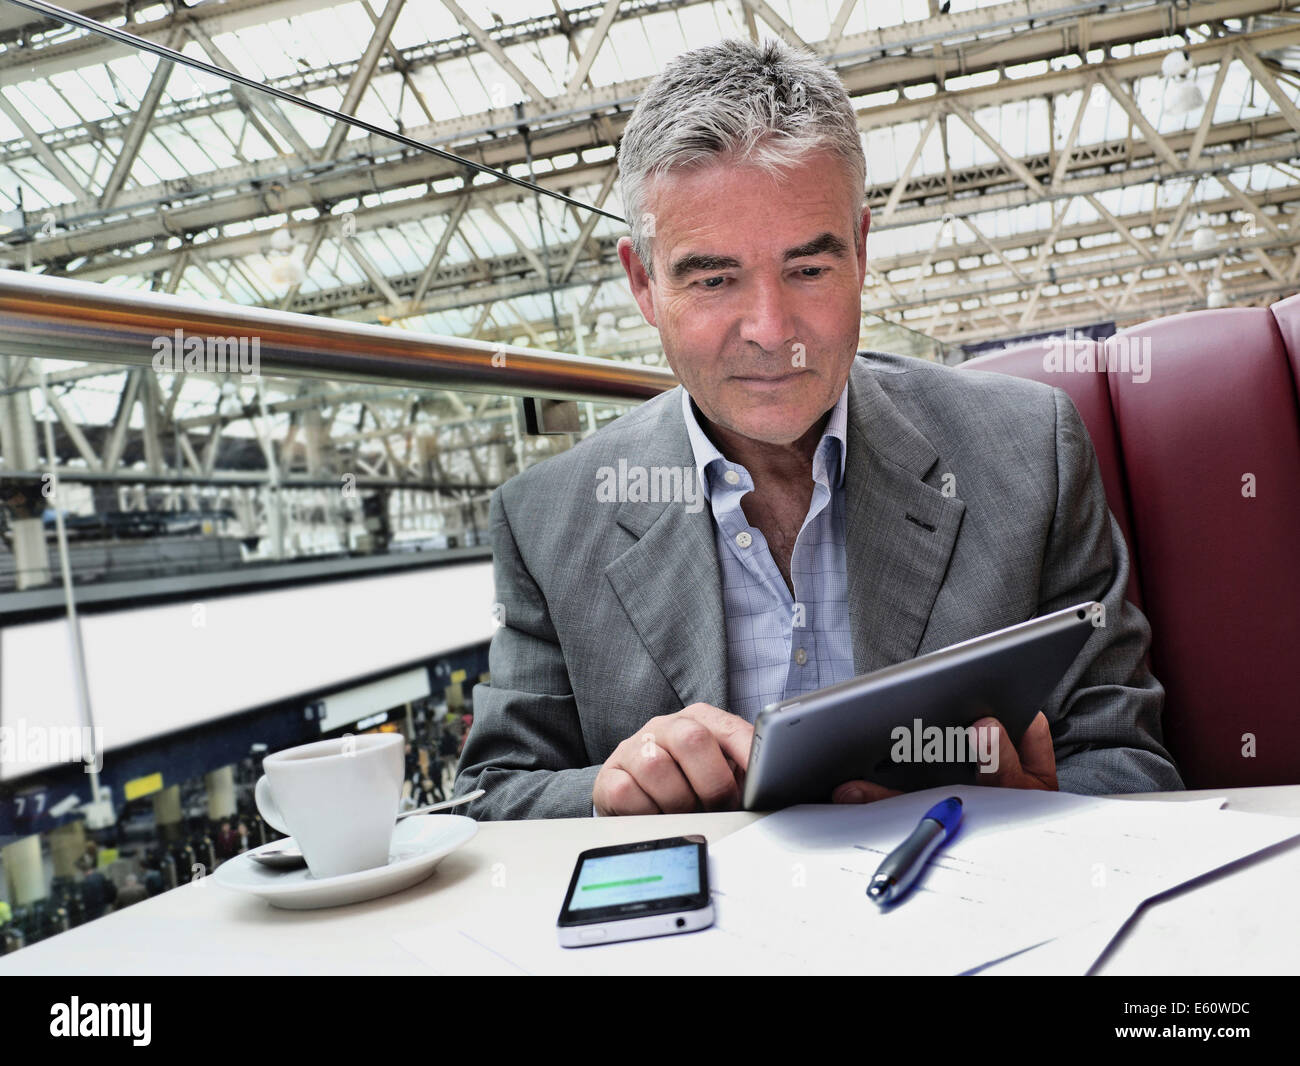 Mature businessman seated at cafe table on railway concourse looking at his iPad tablet computer with iPhone and notes in foreground Stock Photo